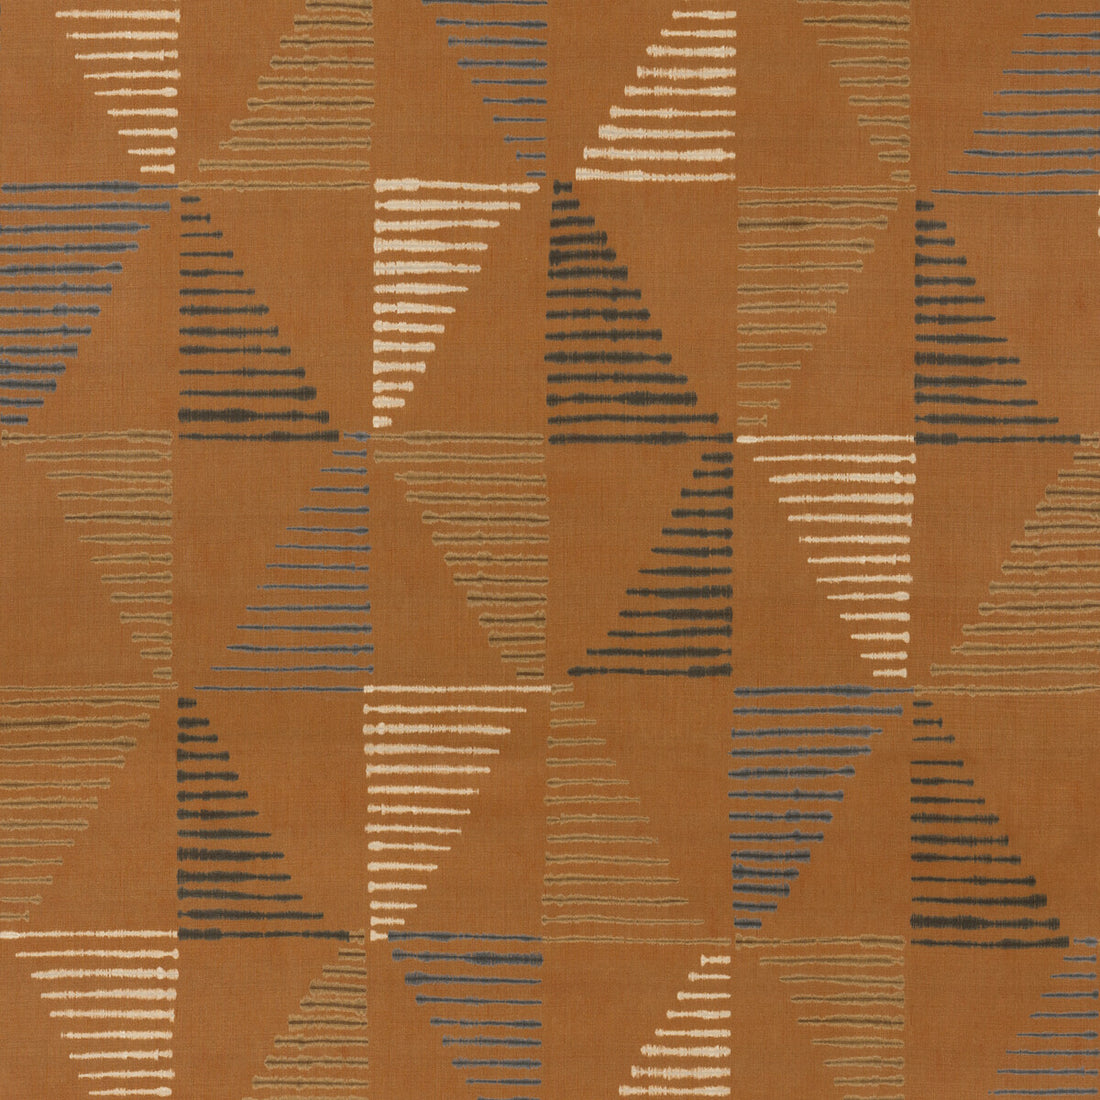 Kaya fabric in spice color - pattern ED75040.2.0 - by Threads in the Nala Prints collection